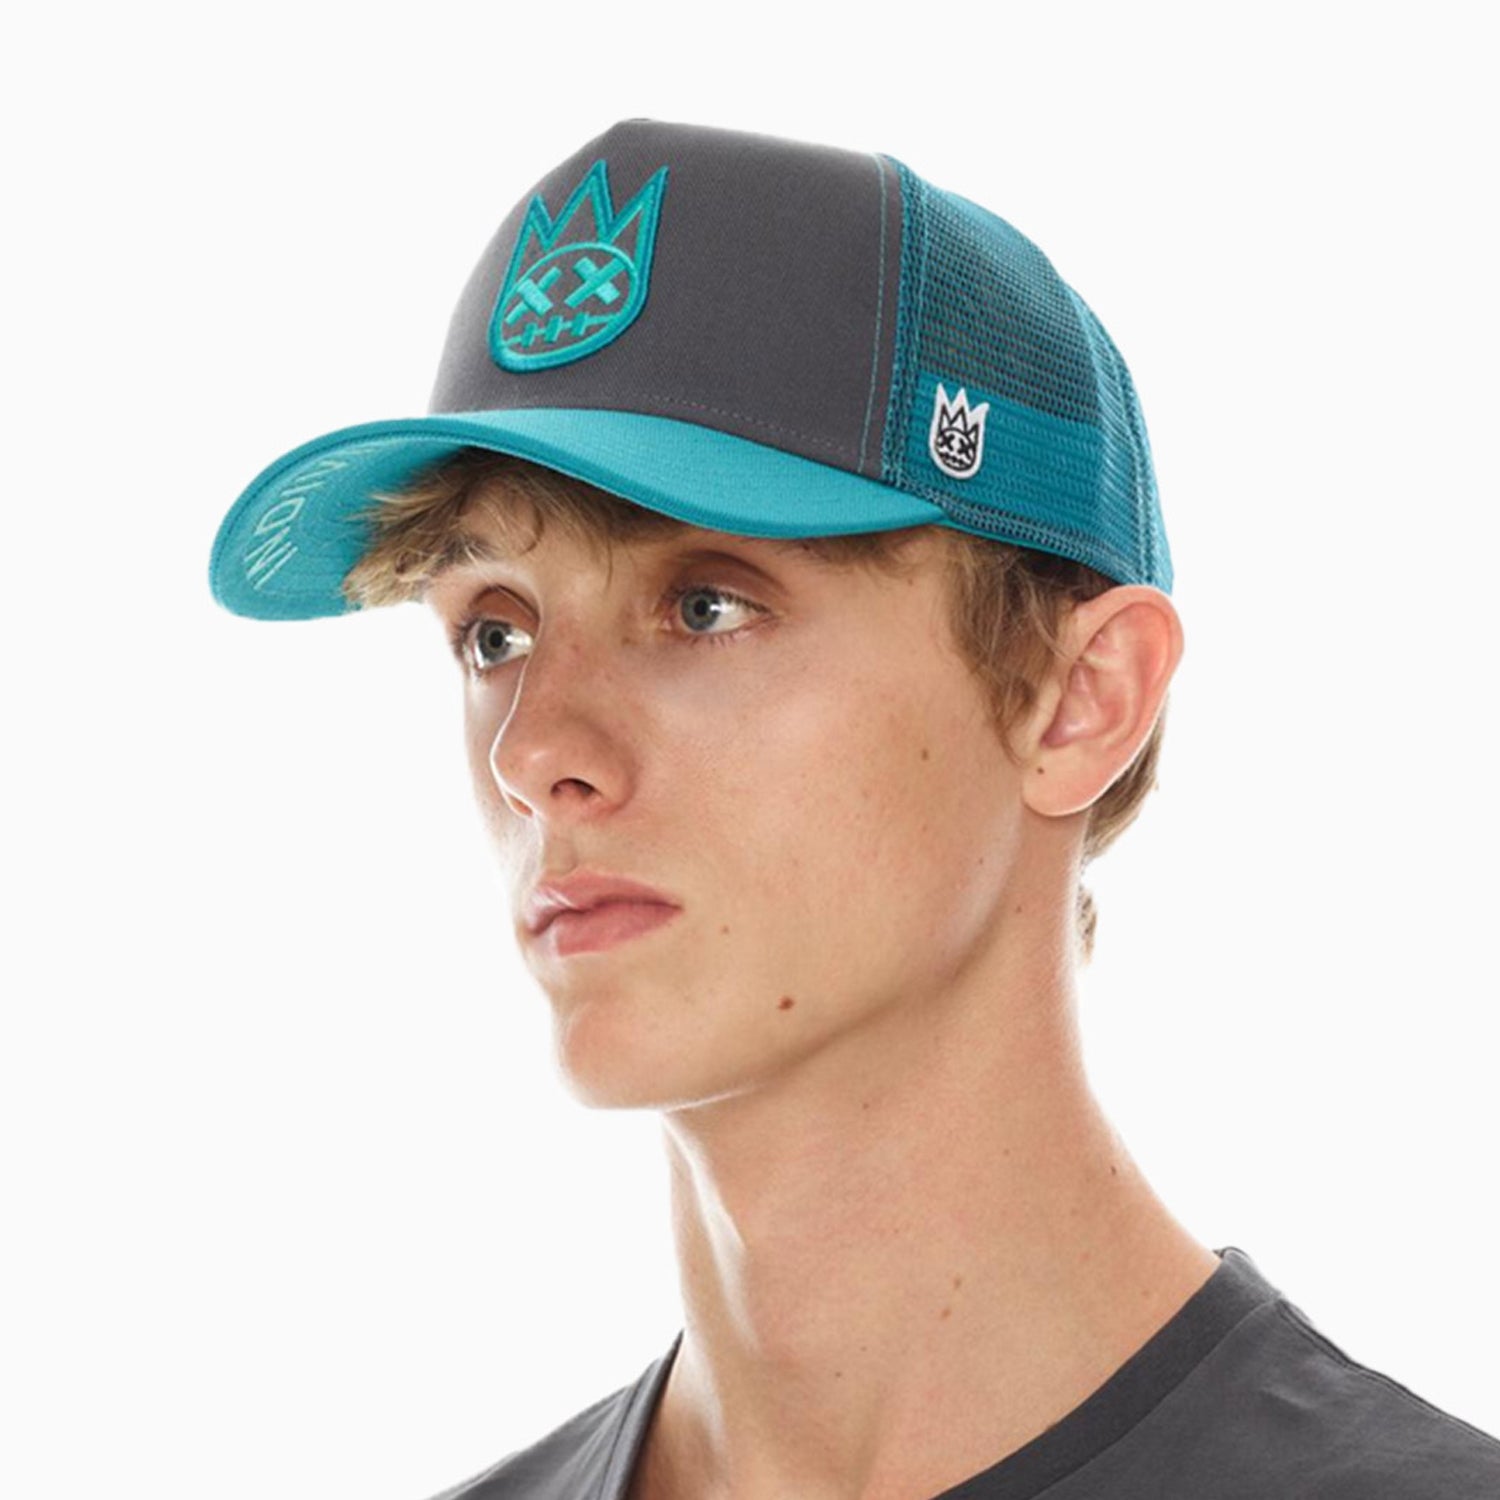 cult-of-individuality-mens-clean-logo-trucker-curved-visor-hat-623b7-ch72a